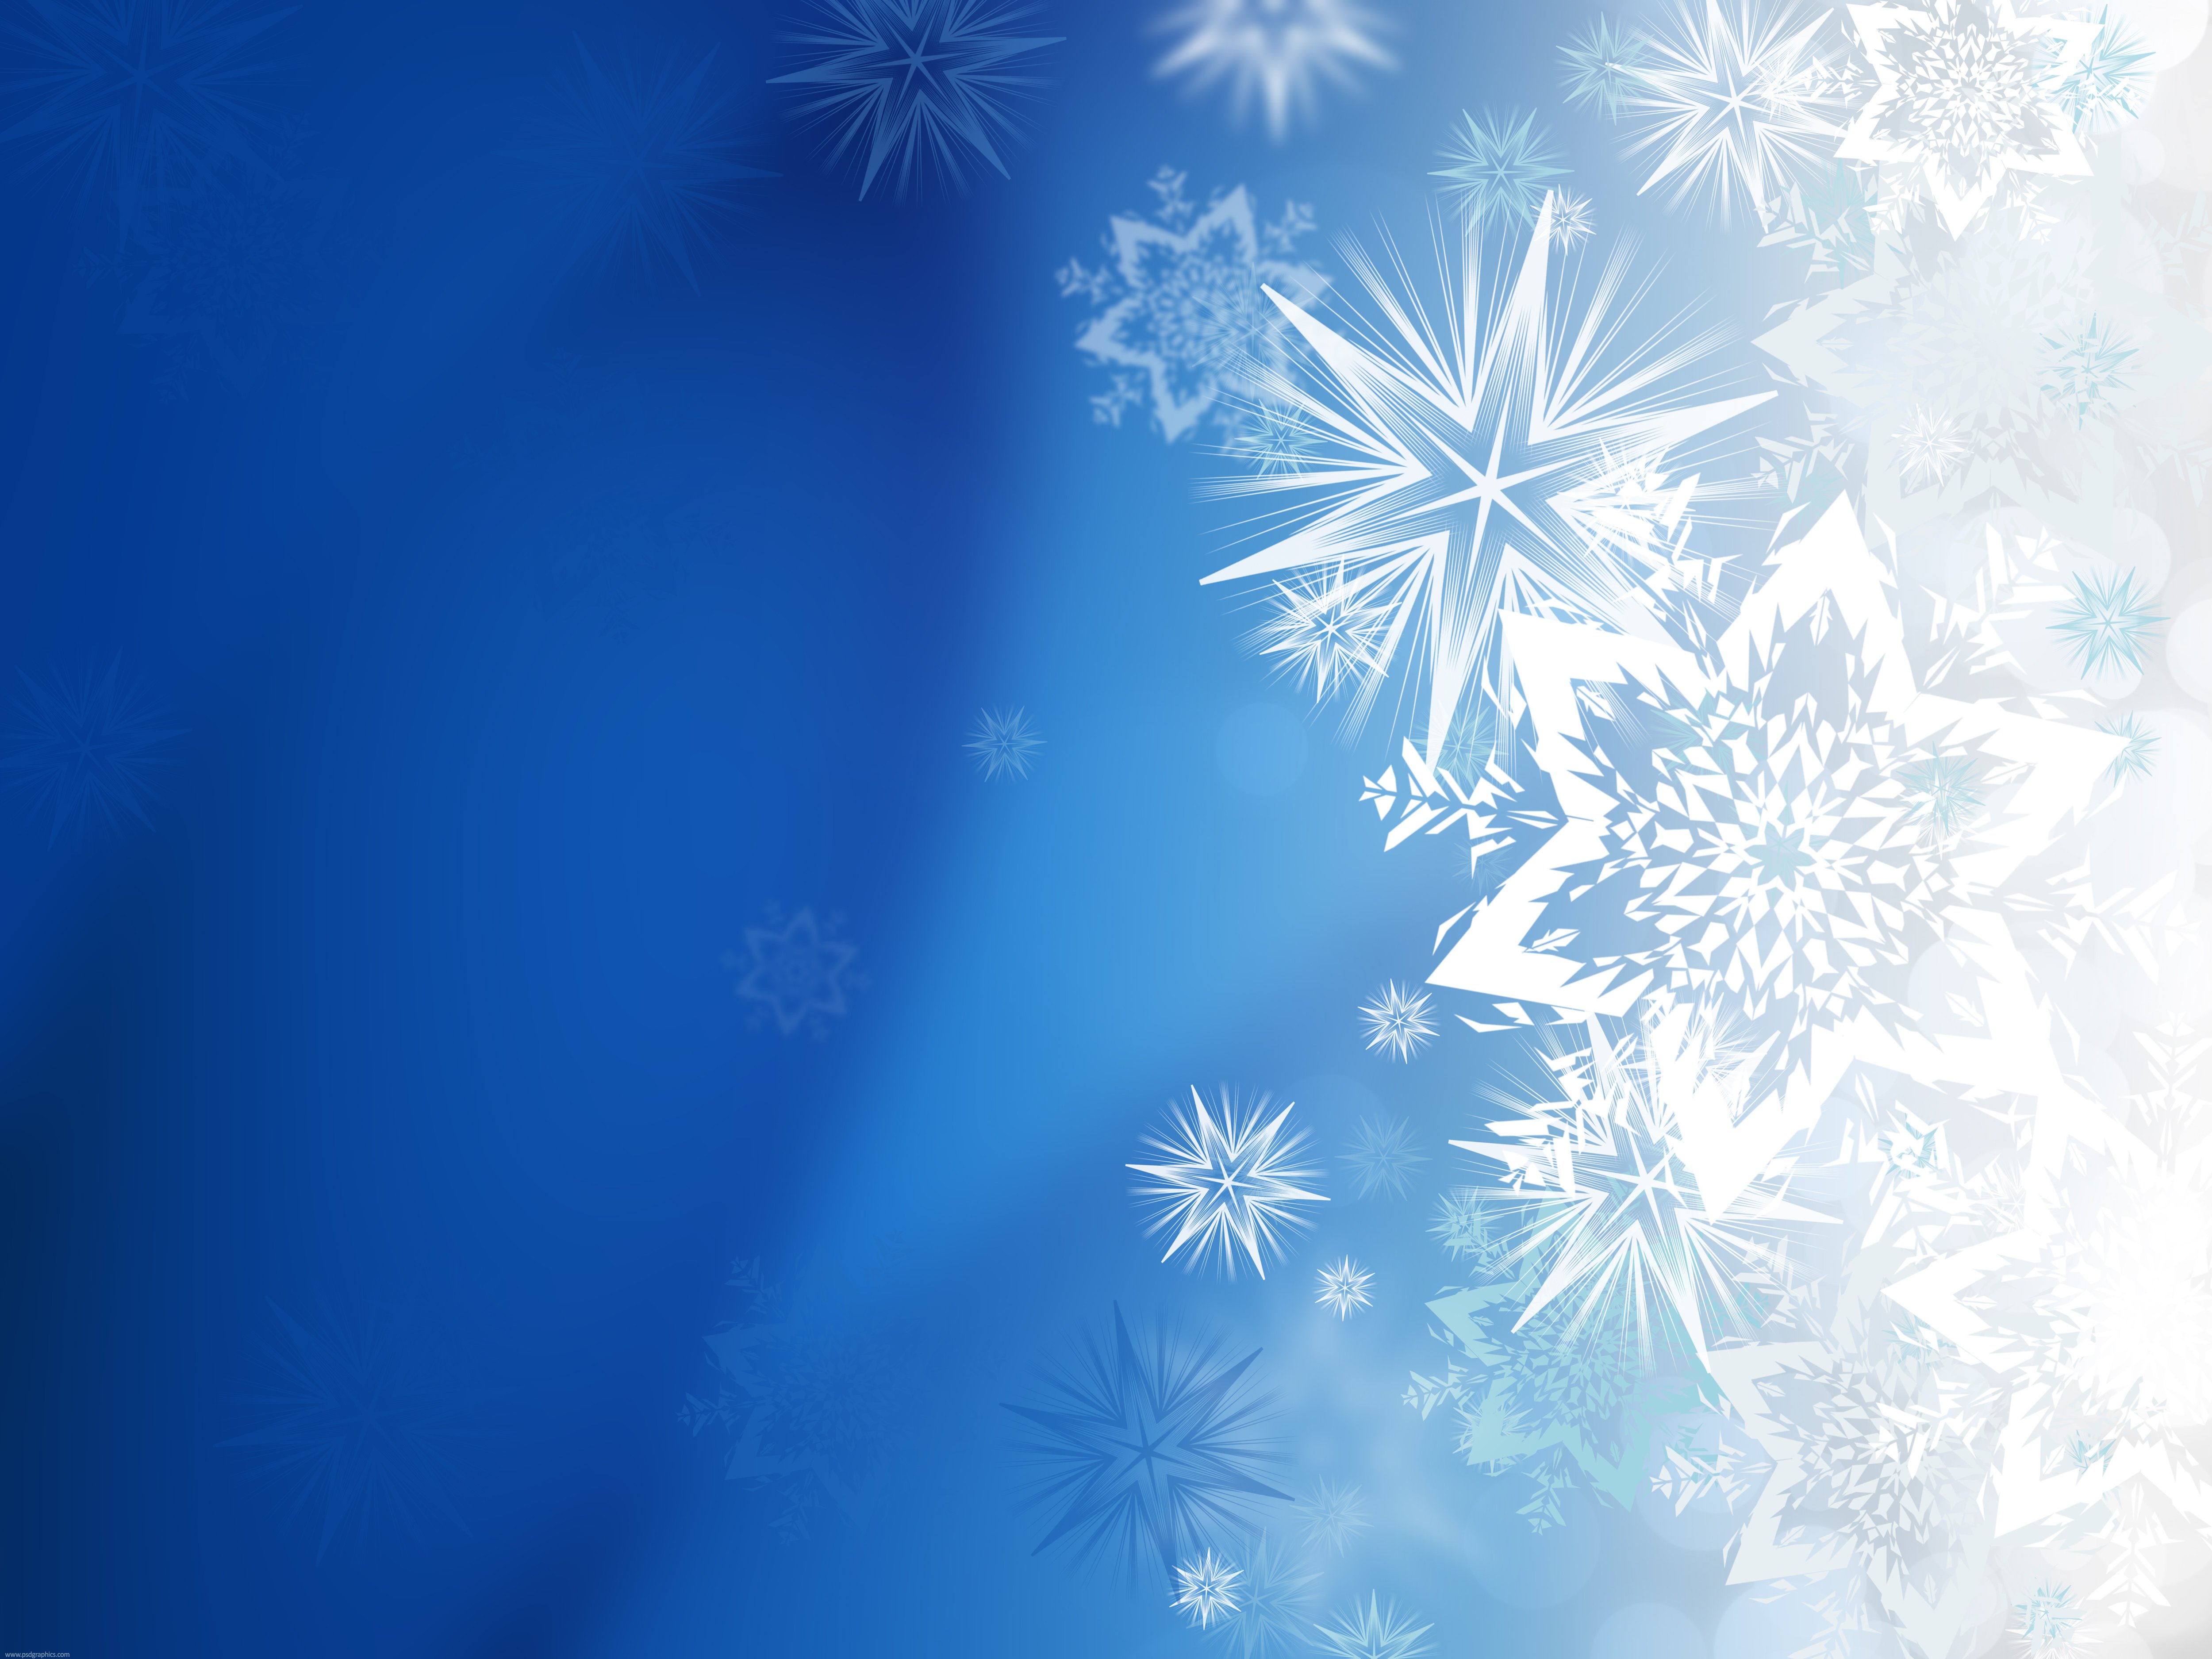  background xmas snowflakes background abstract winter design grungy 5000x3750